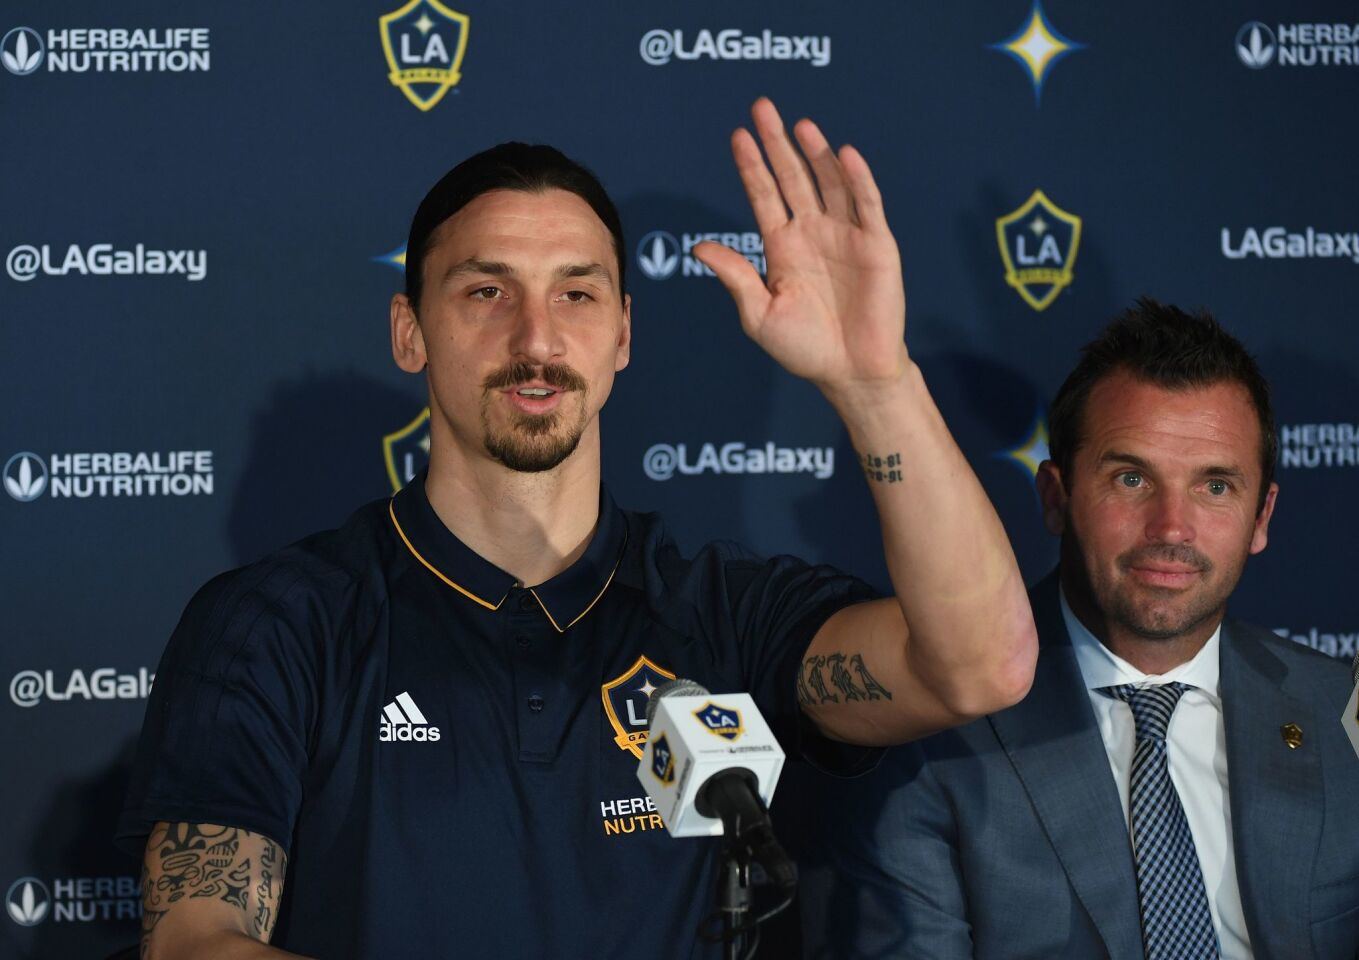 LA Galaxy footballer Zlatan Ibrahimovic gestures during his first press conference for the club in Los Angeles, California, on March 30, 2018. The 36-year-old Swedish striker's move to MLS from Manchester United was confirmed last week, with Ibrahimovic swiftly vowing to reignite the Galaxy's fortunes after they finished bottom of the league last season. / AFP PHOTO / Mark RalstonMARK RALSTON/AFP/Getty Images ** OUTS - ELSENT, FPG, CM - OUTS * NM, PH, VA if sourced by CT, LA or MoD **